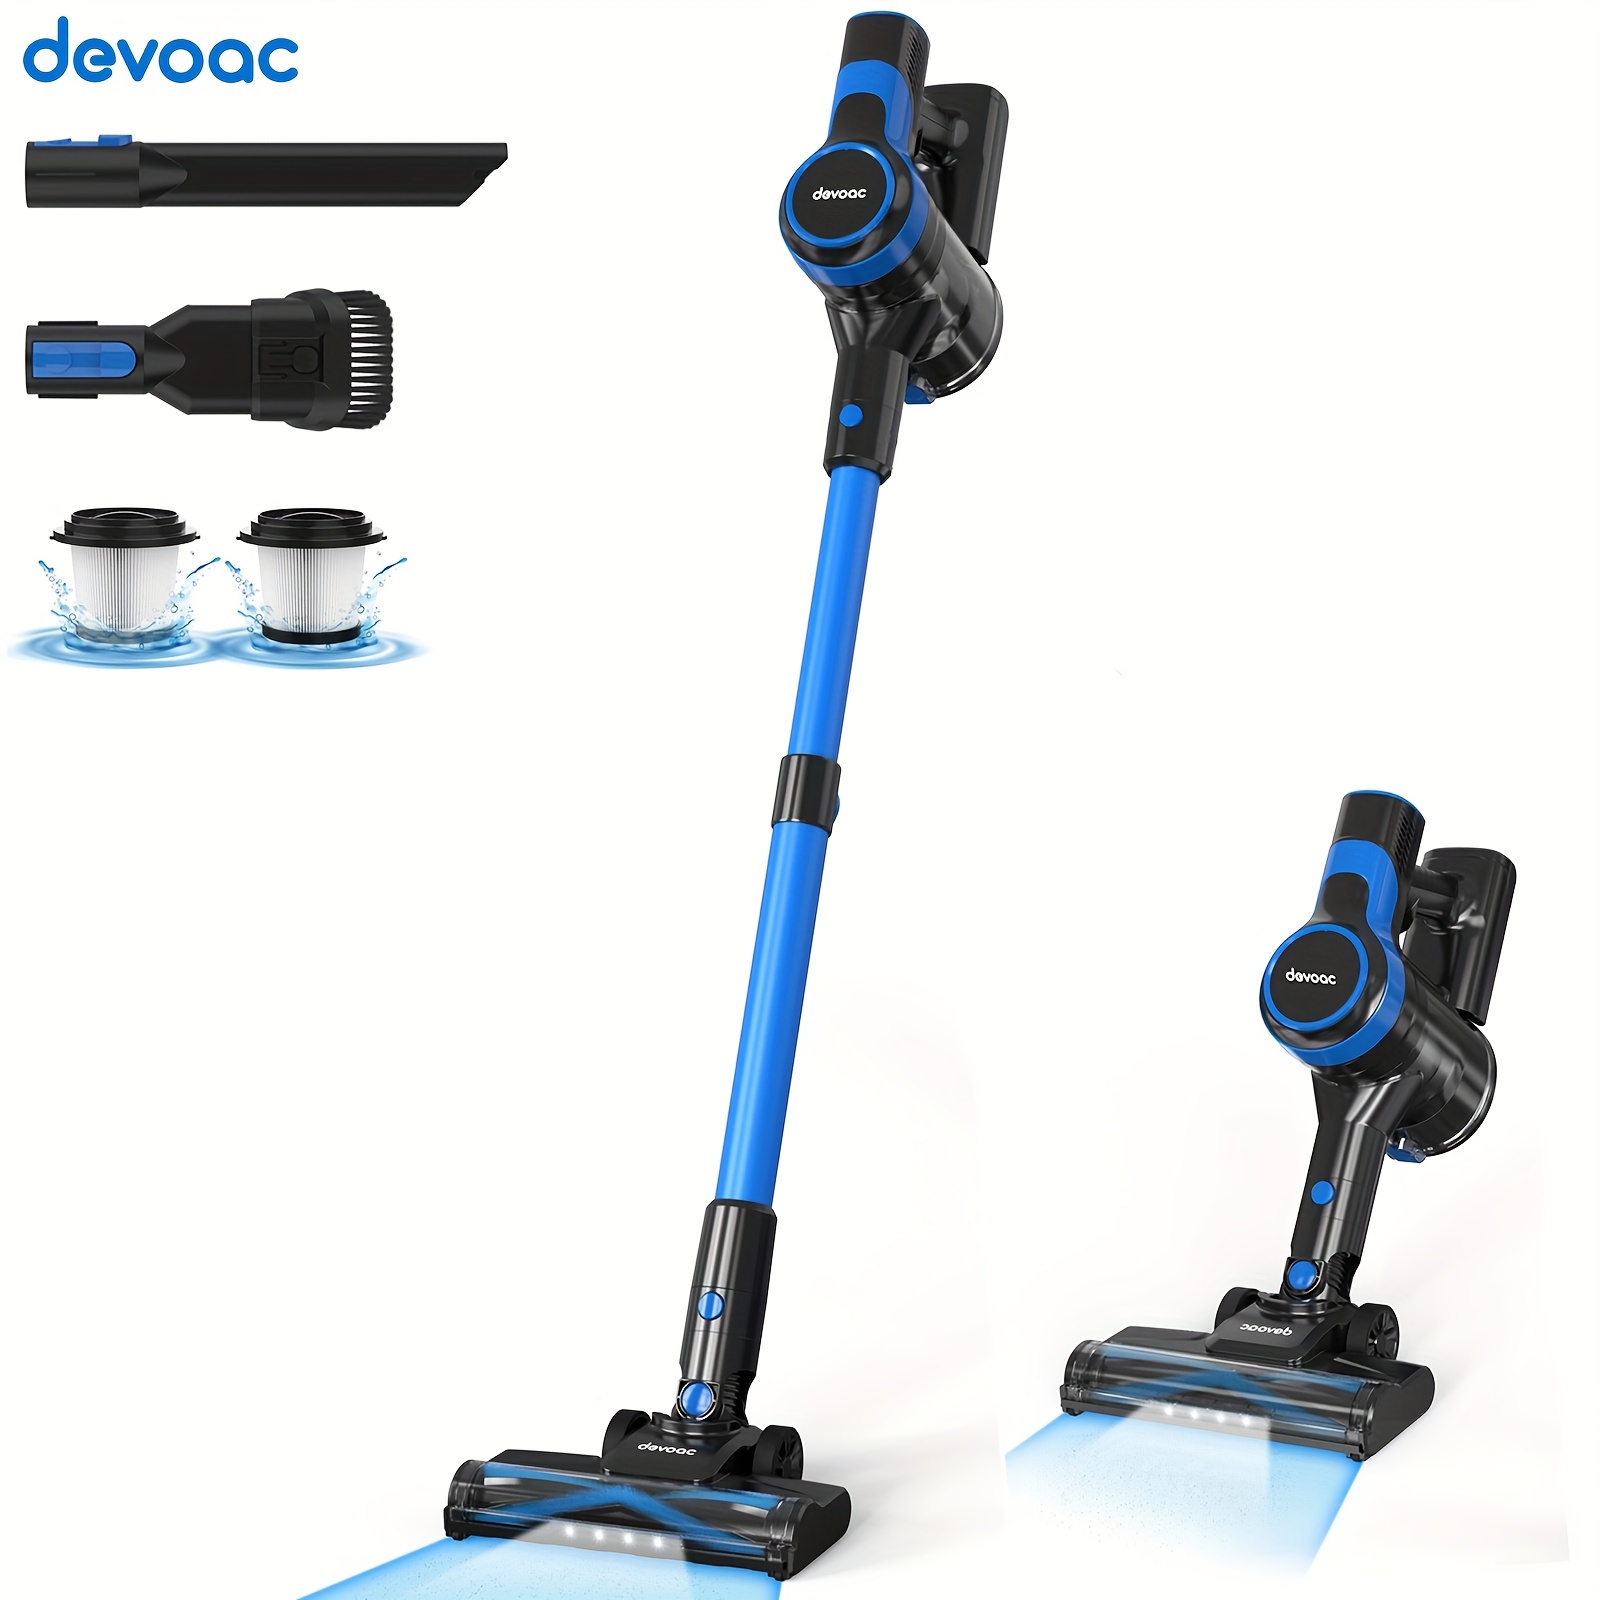 

Devoac Cordless Vacuum Cleaner, Lightweight Vacuum Cleaner With Rechargeable Battery, Convenient 6 In 1 Stick Vacuum Cleaner With Powerful Suction, Handheld Vacuum For Carpet Hard Floor Pet Hair Home